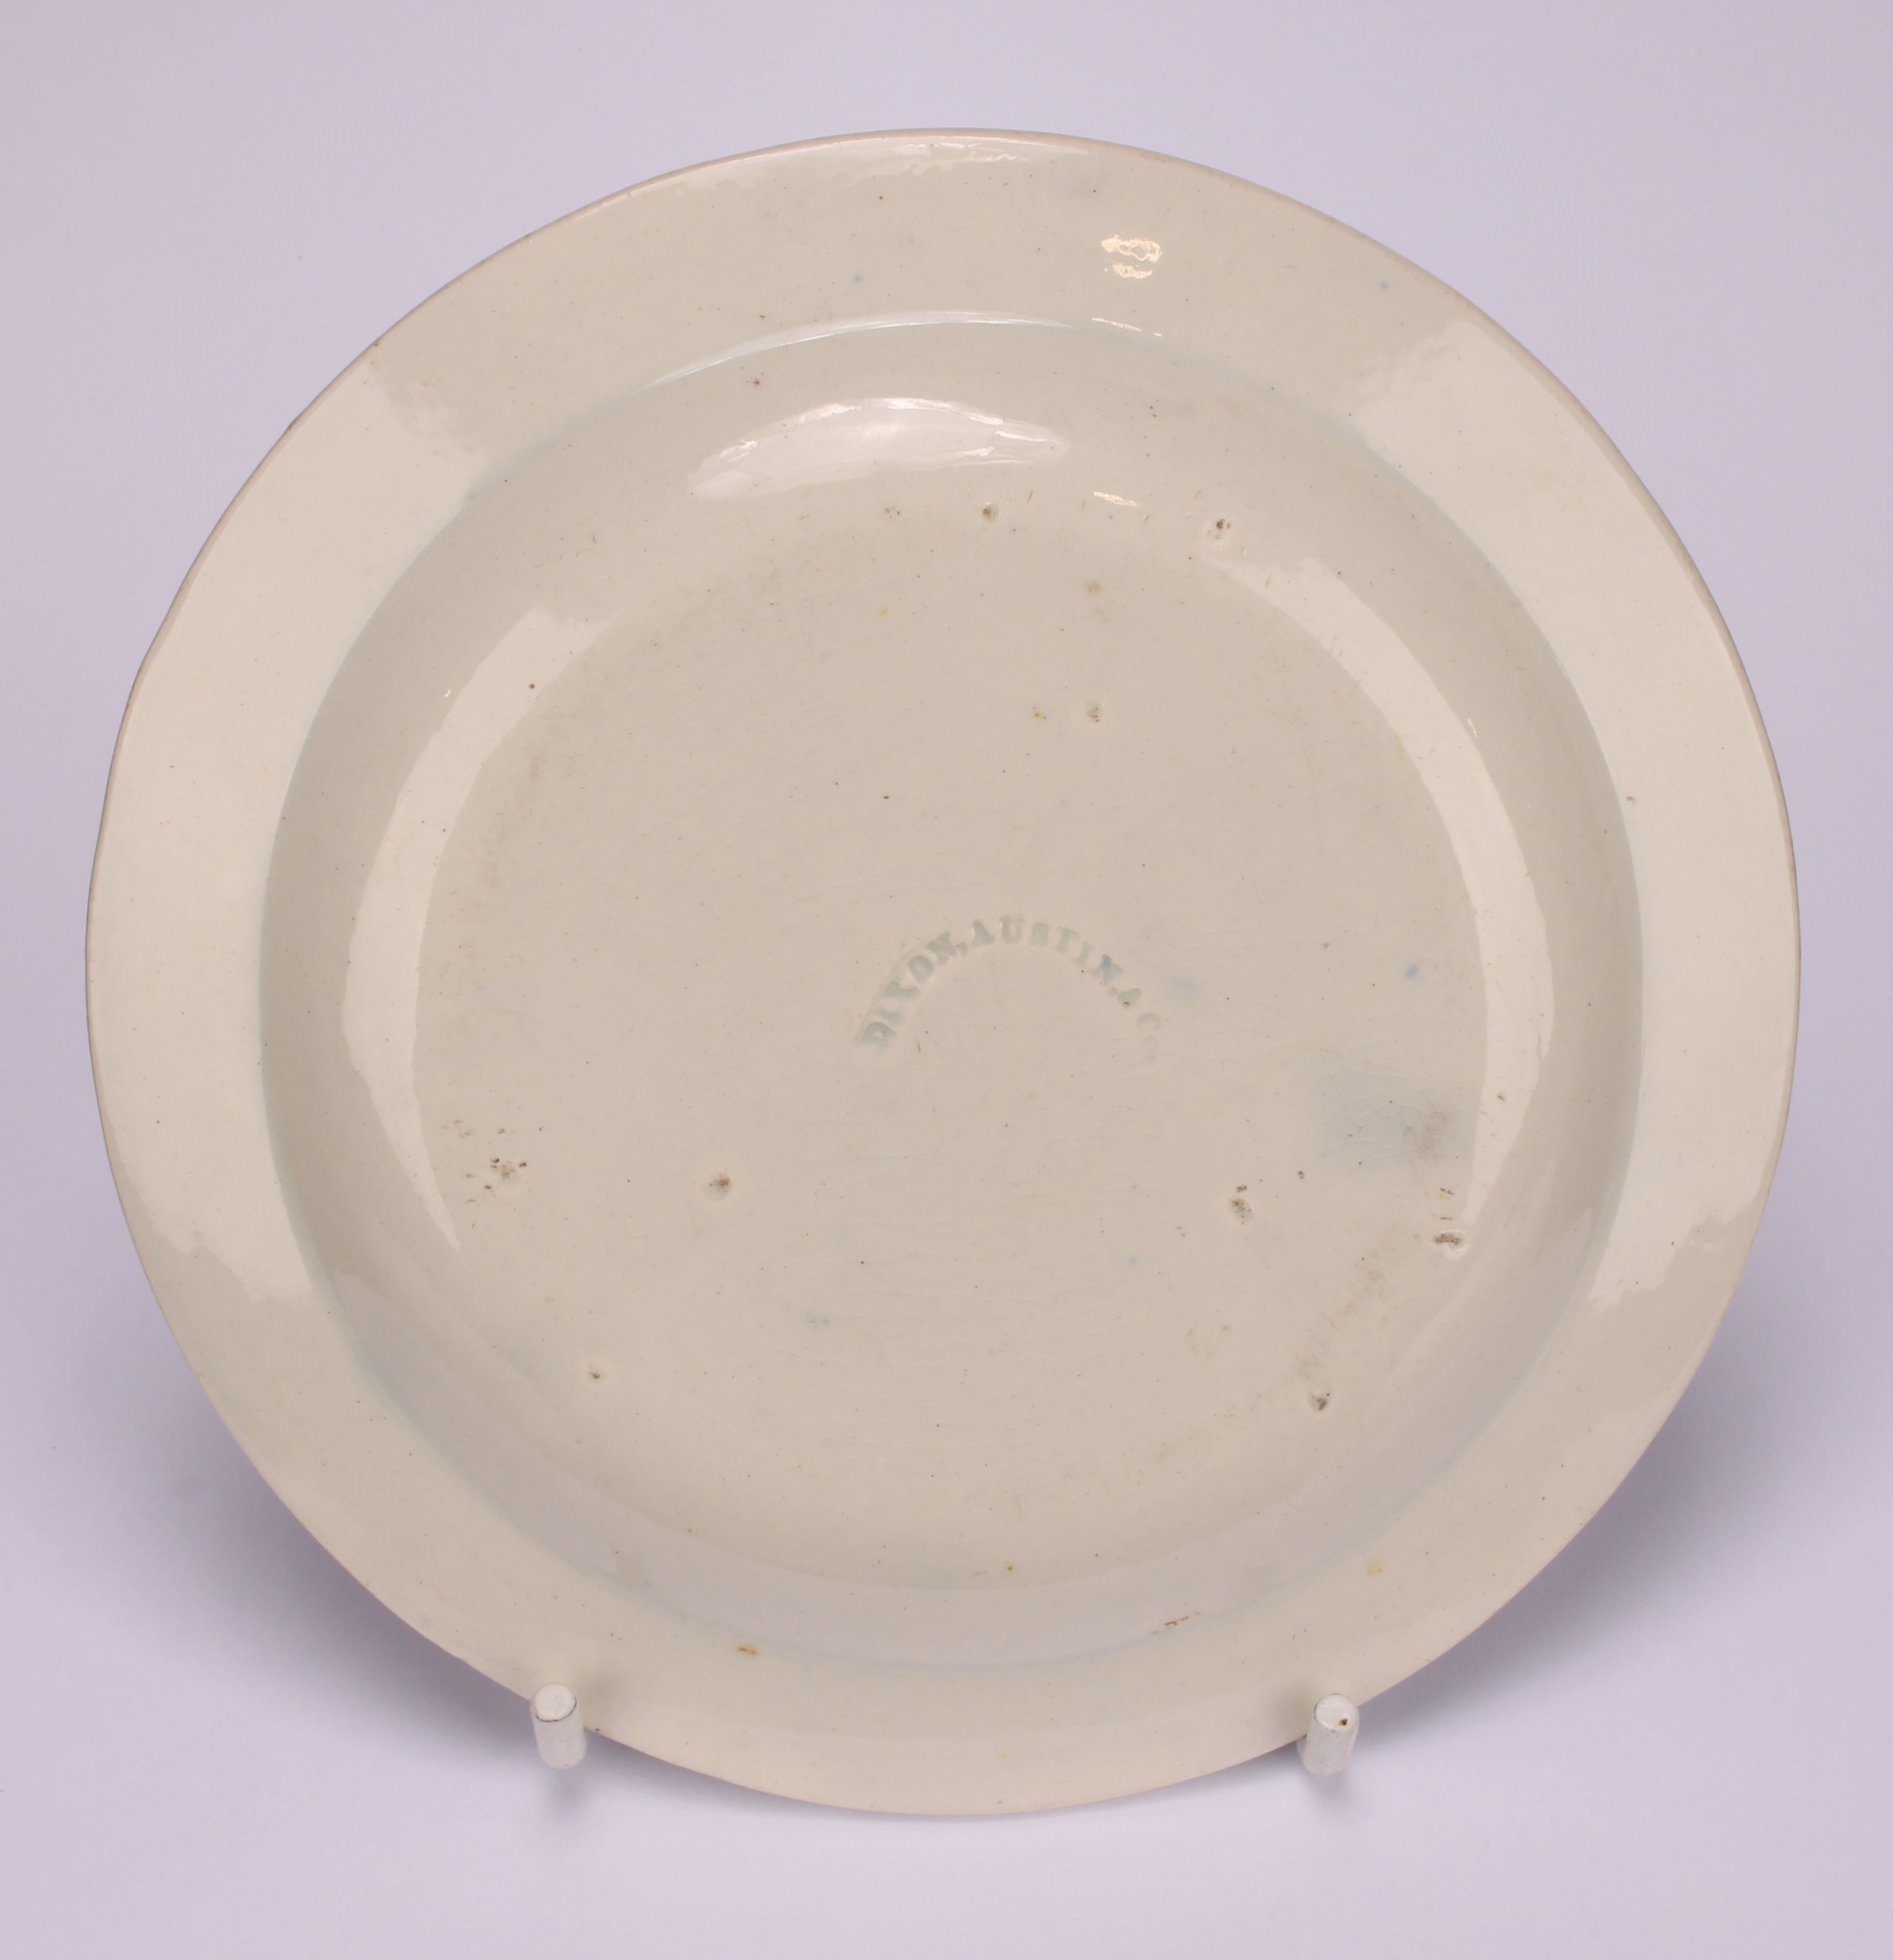 A Dixon, Austin & Co pearlware miniature plate, A Trifle From Sunderland, printed with tall ships, - Image 3 of 3